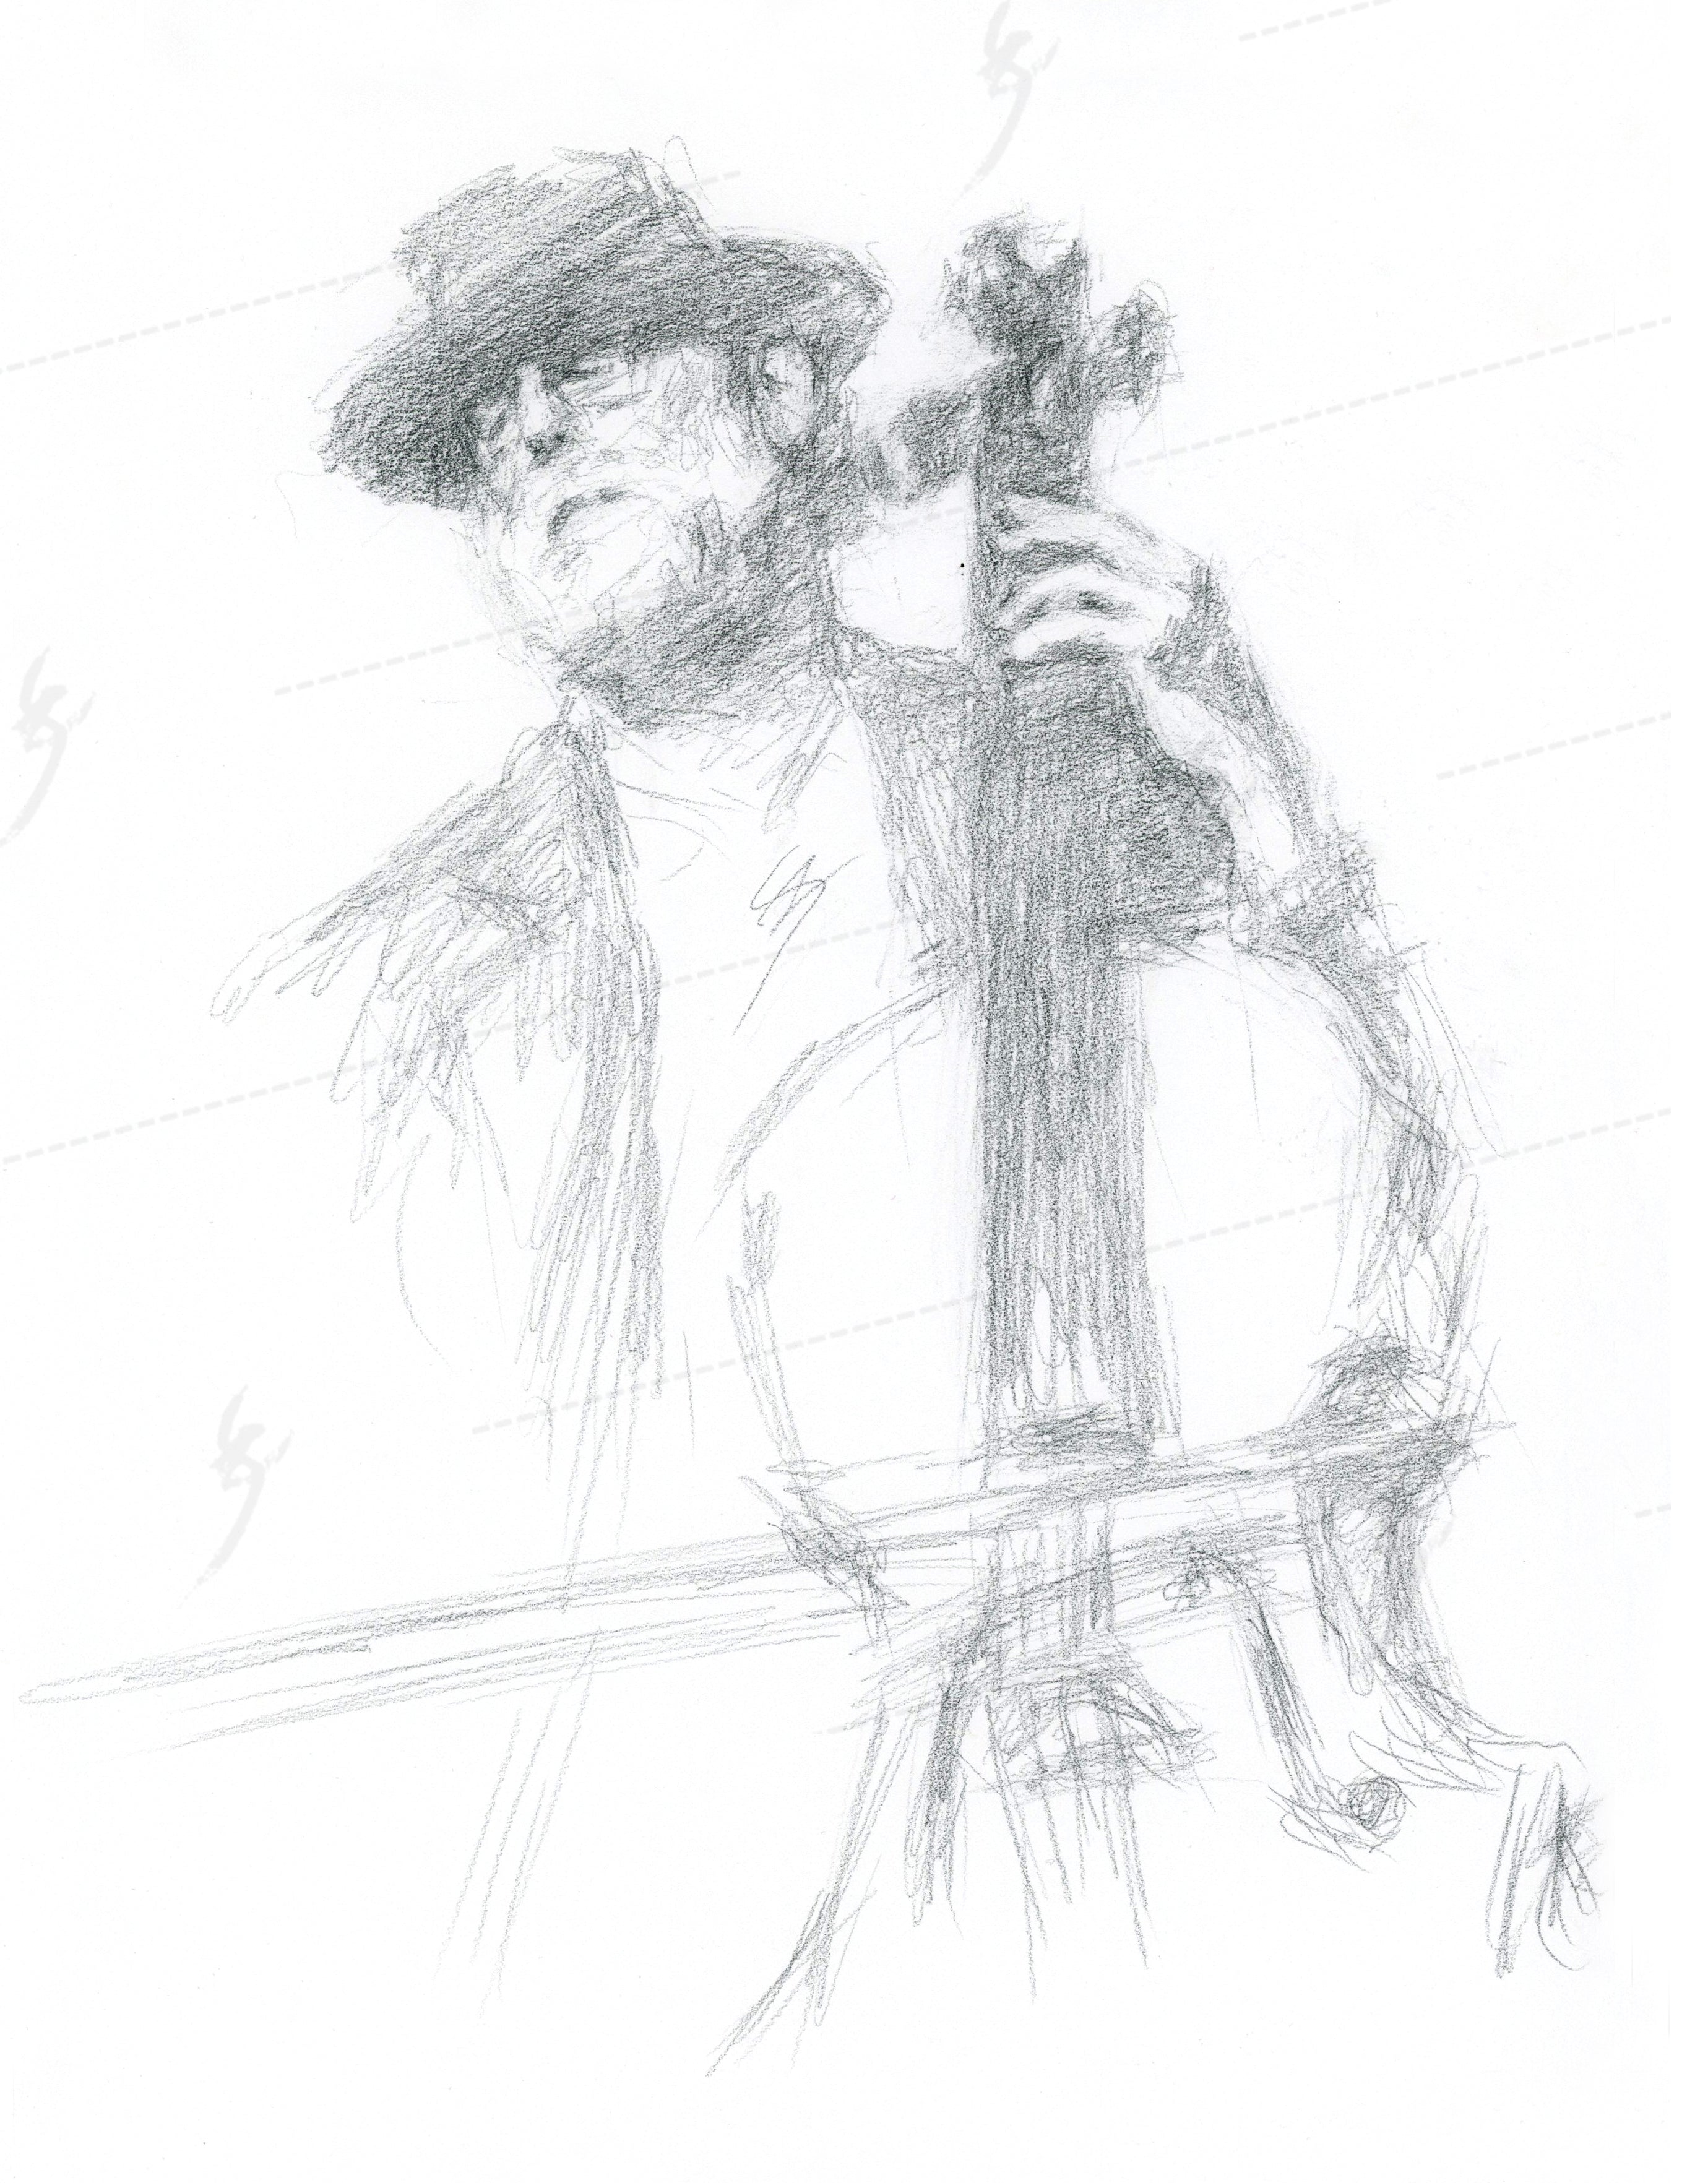 "Snazzy Cellist" Bubble-free sticker of pencil drawing